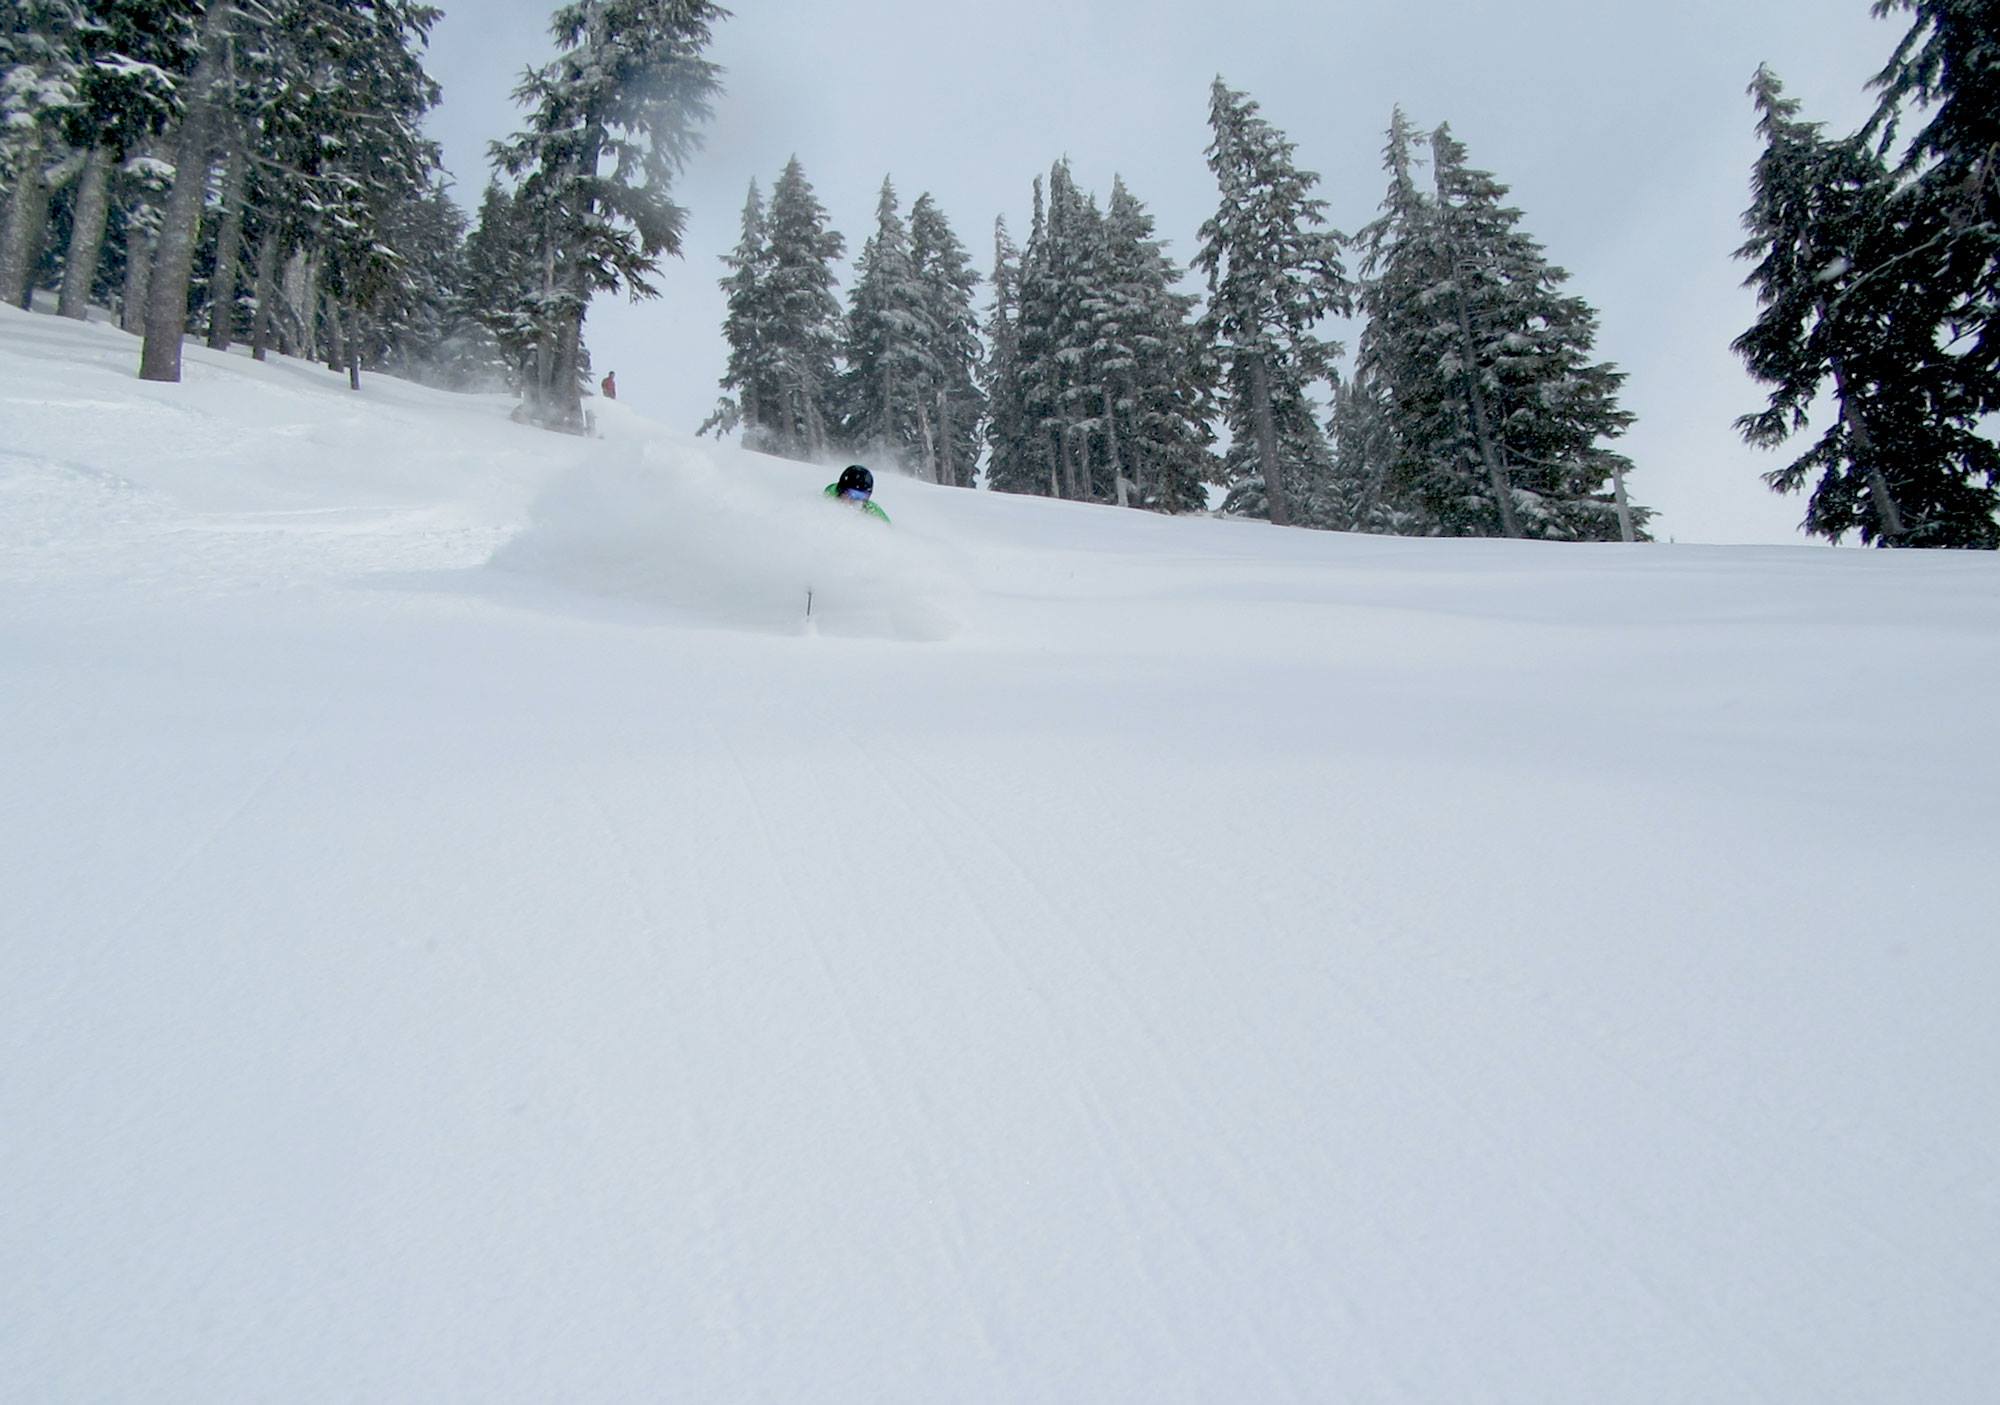 We lucked in with a good powder day